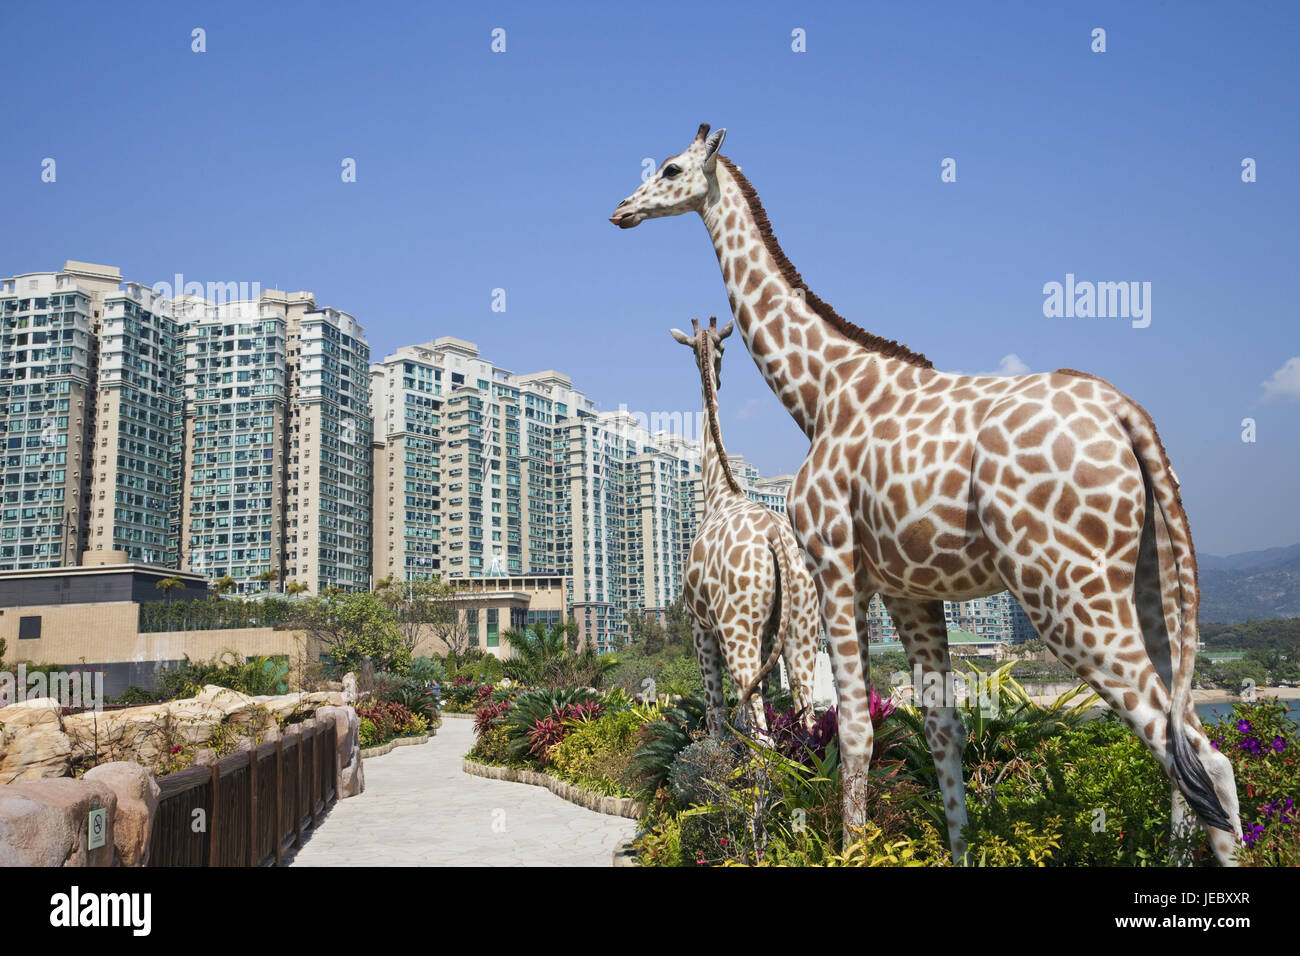 China, Hong Kong, park Iceland, full-size giraffes sculptures in the Noah's ark, high rises in the background, Stock Photo